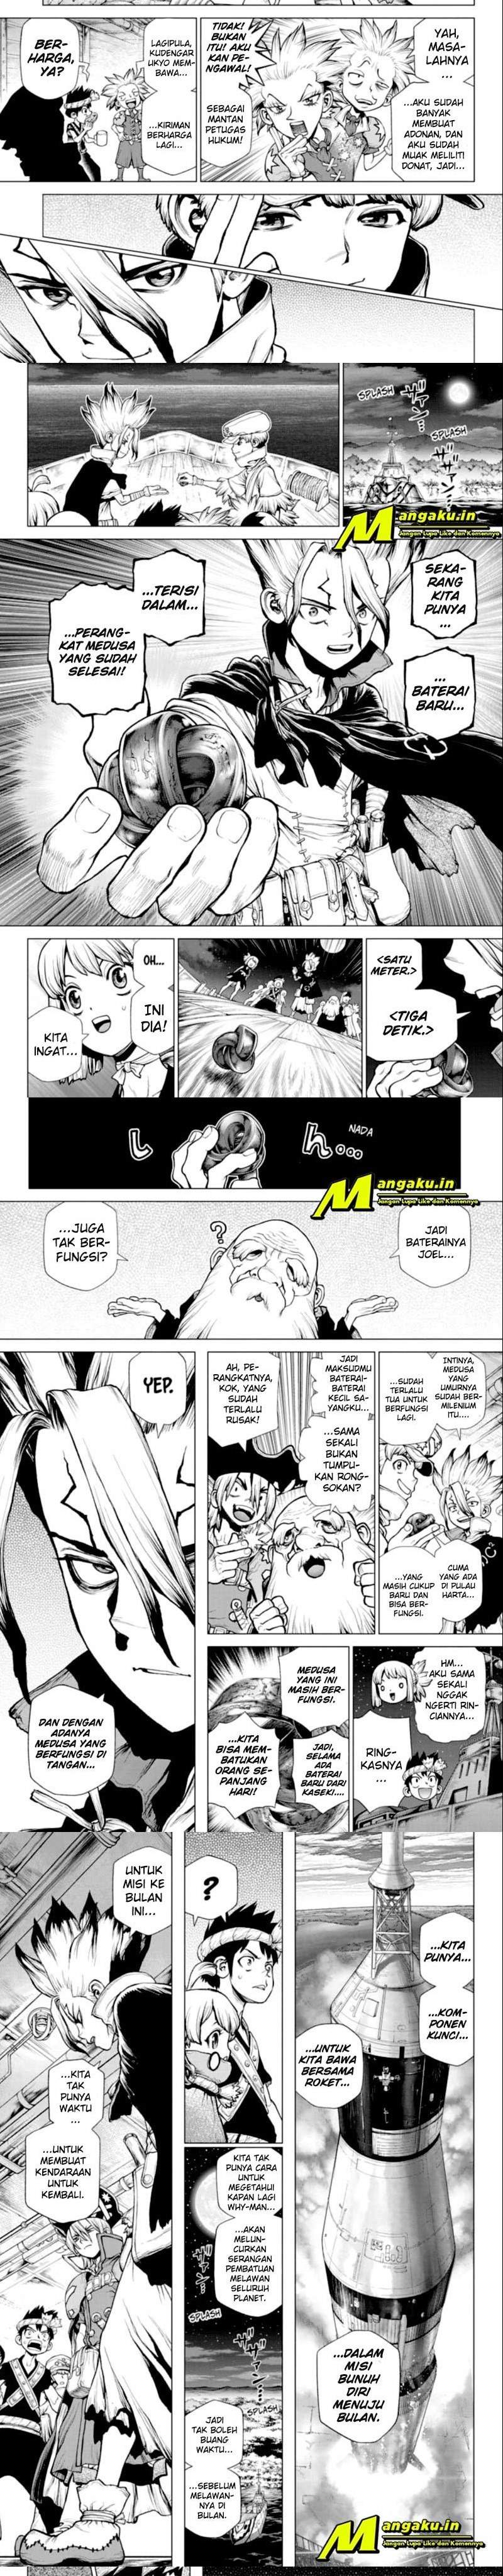 Dr Stone Chapter 209